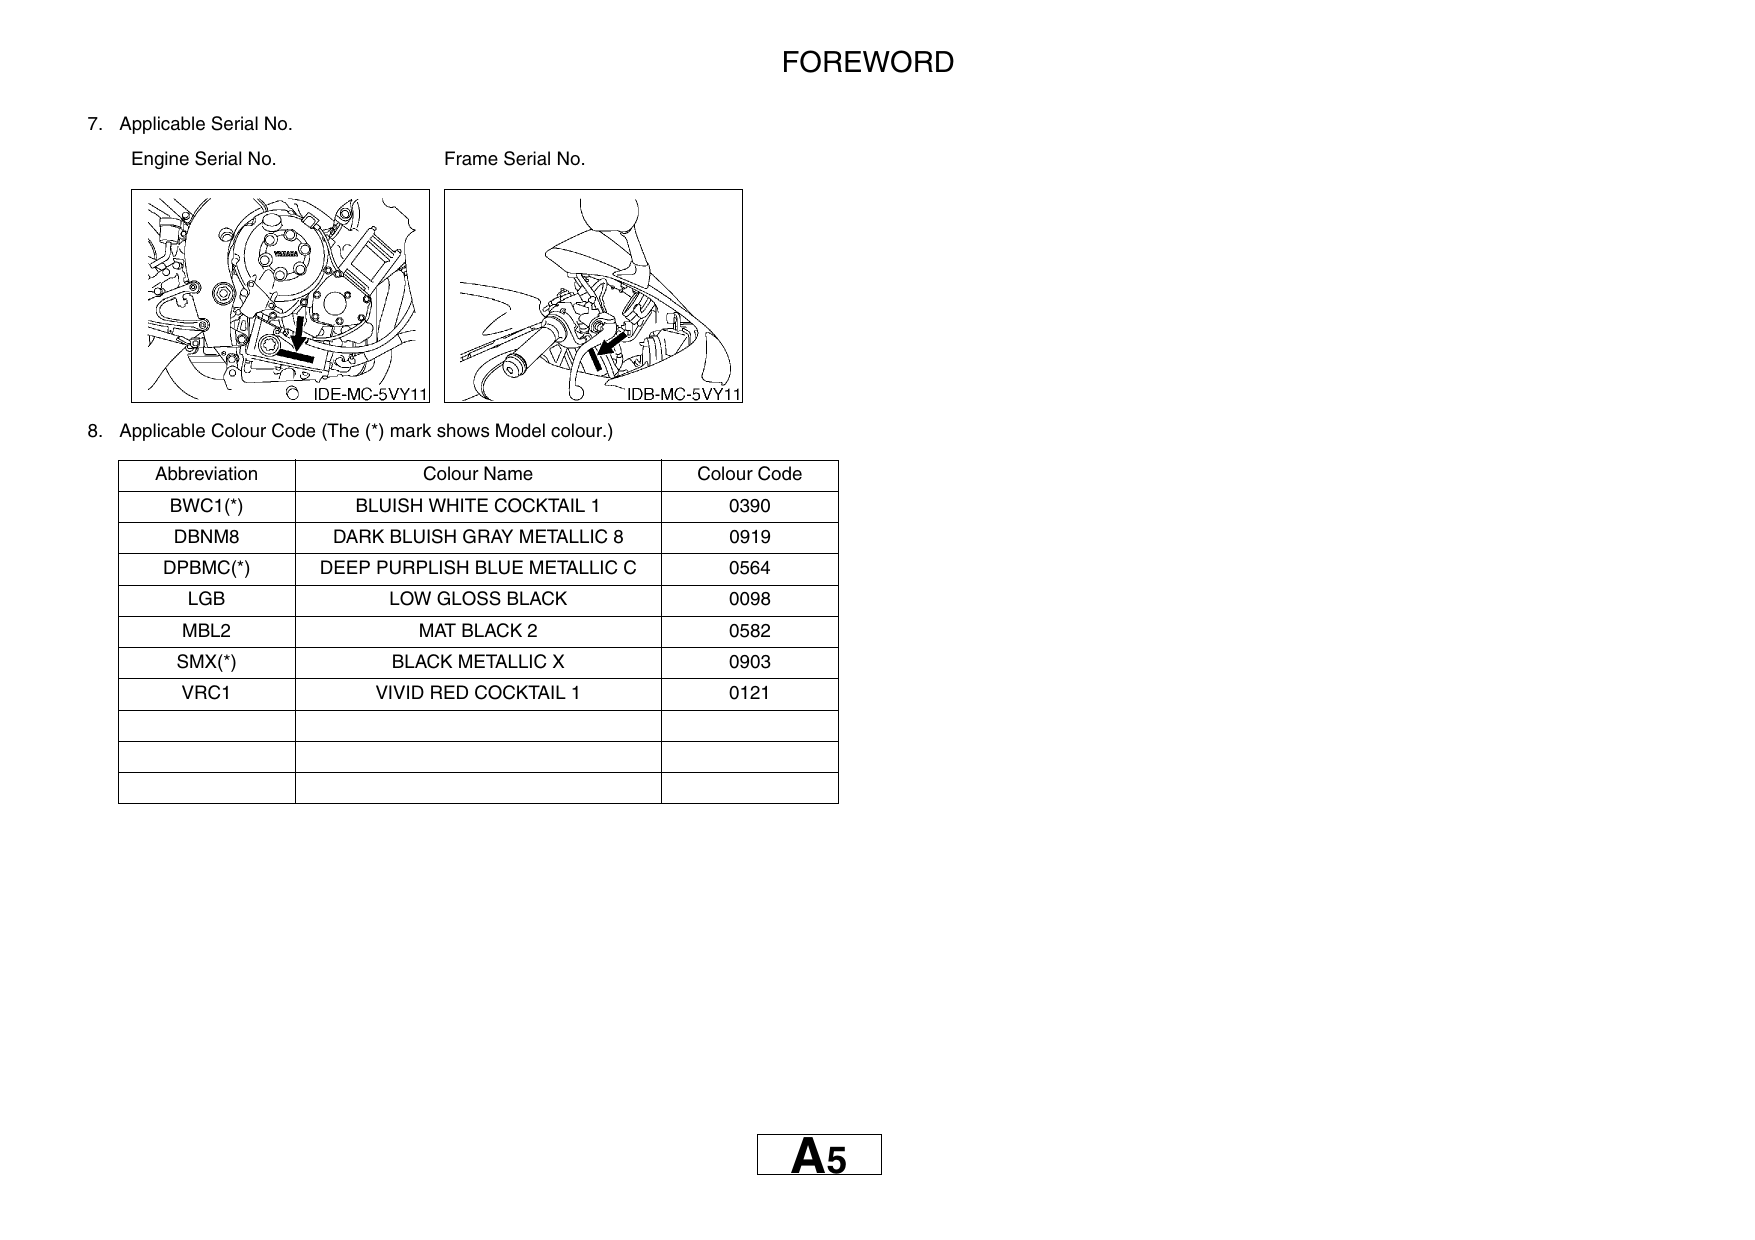 2007-2008 Yamaha YZF-R1 service and shop manual Preview image 4